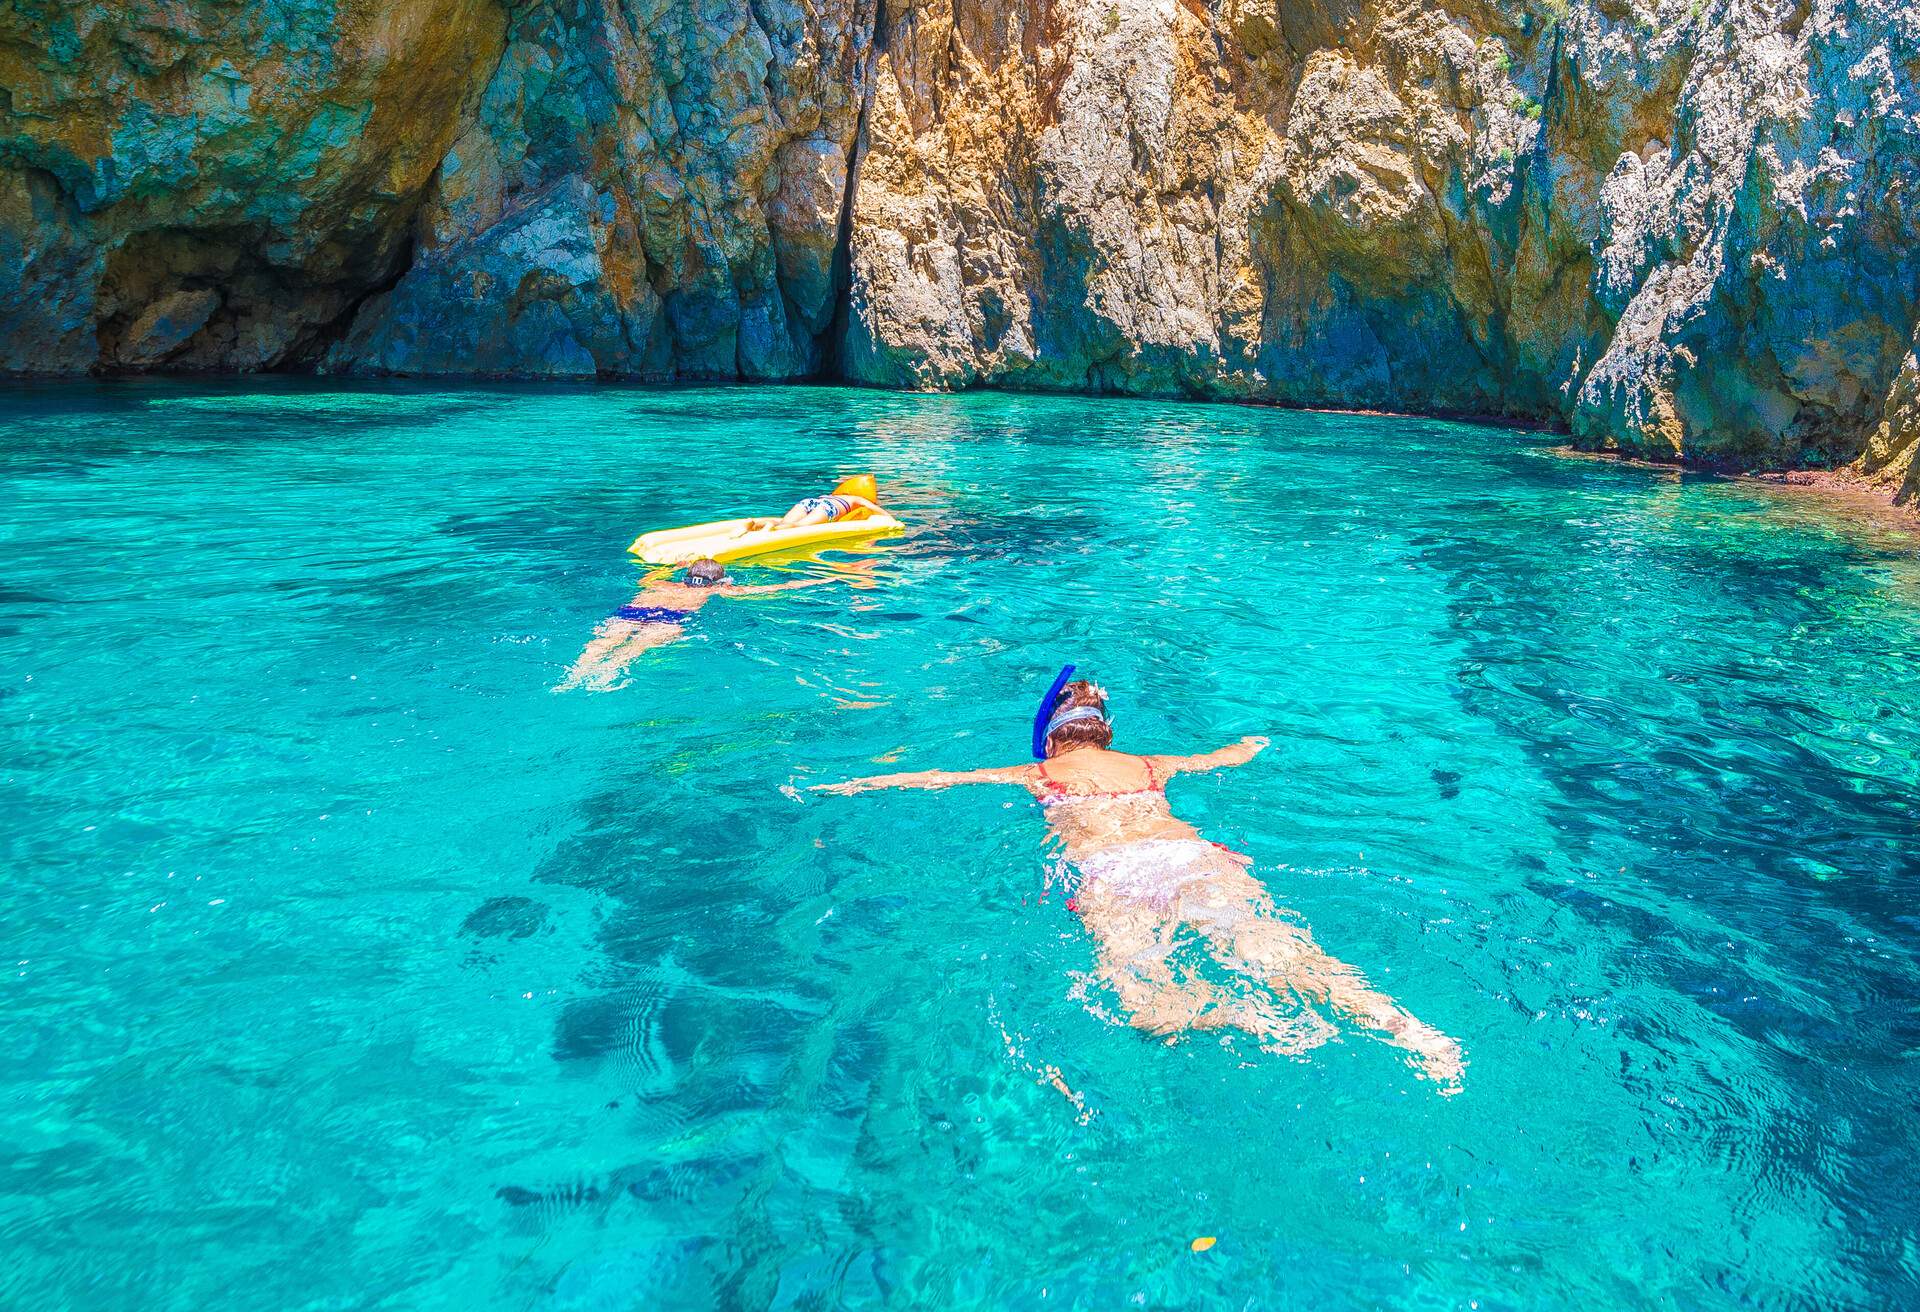 Three people snorkelling in a clear lagoon, with one riding a yellow inflatable boat.